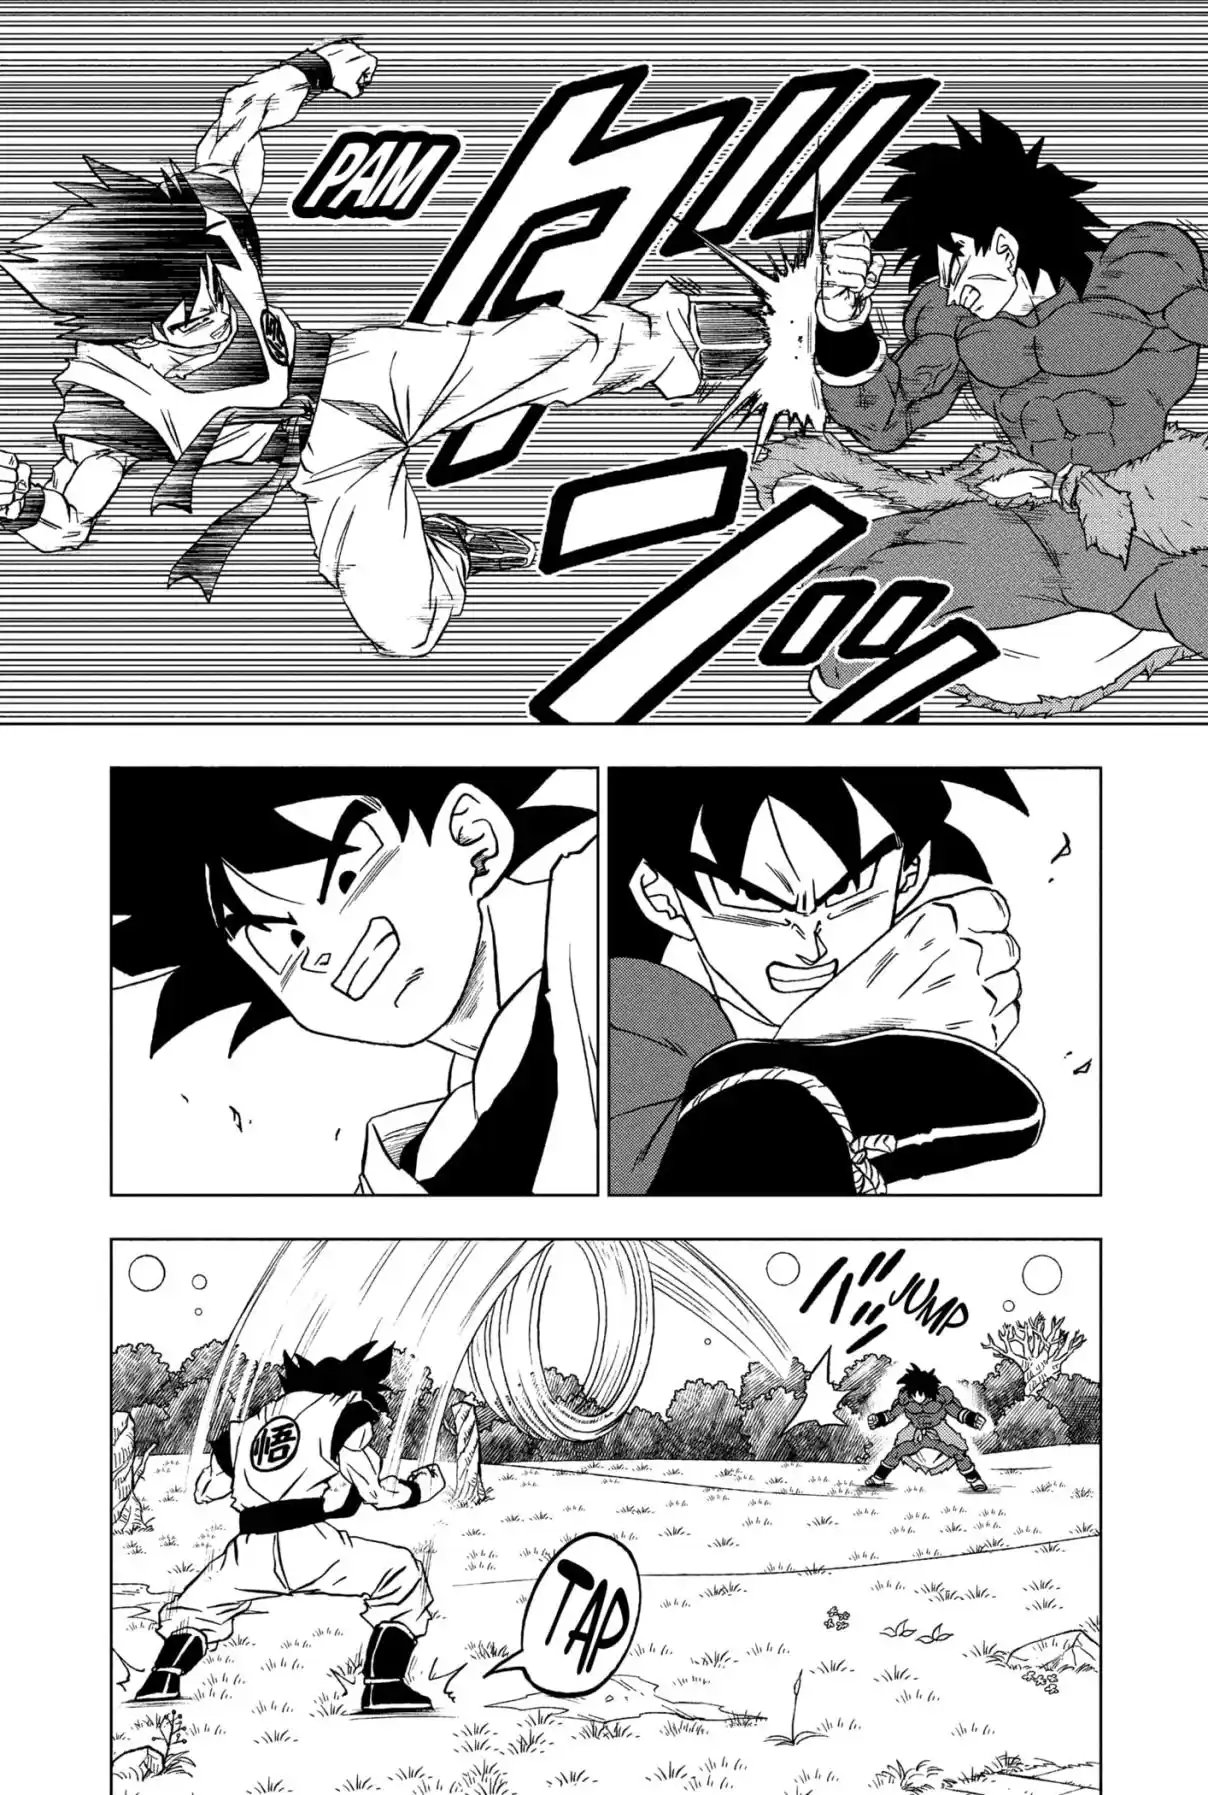 Scholar on X: Dragon Ball Super Manga Chapter 92 DOUBLE CONFIRMS Goku and  Vegeta EQUAL Gammas? Explaining this in the video link below.   / X